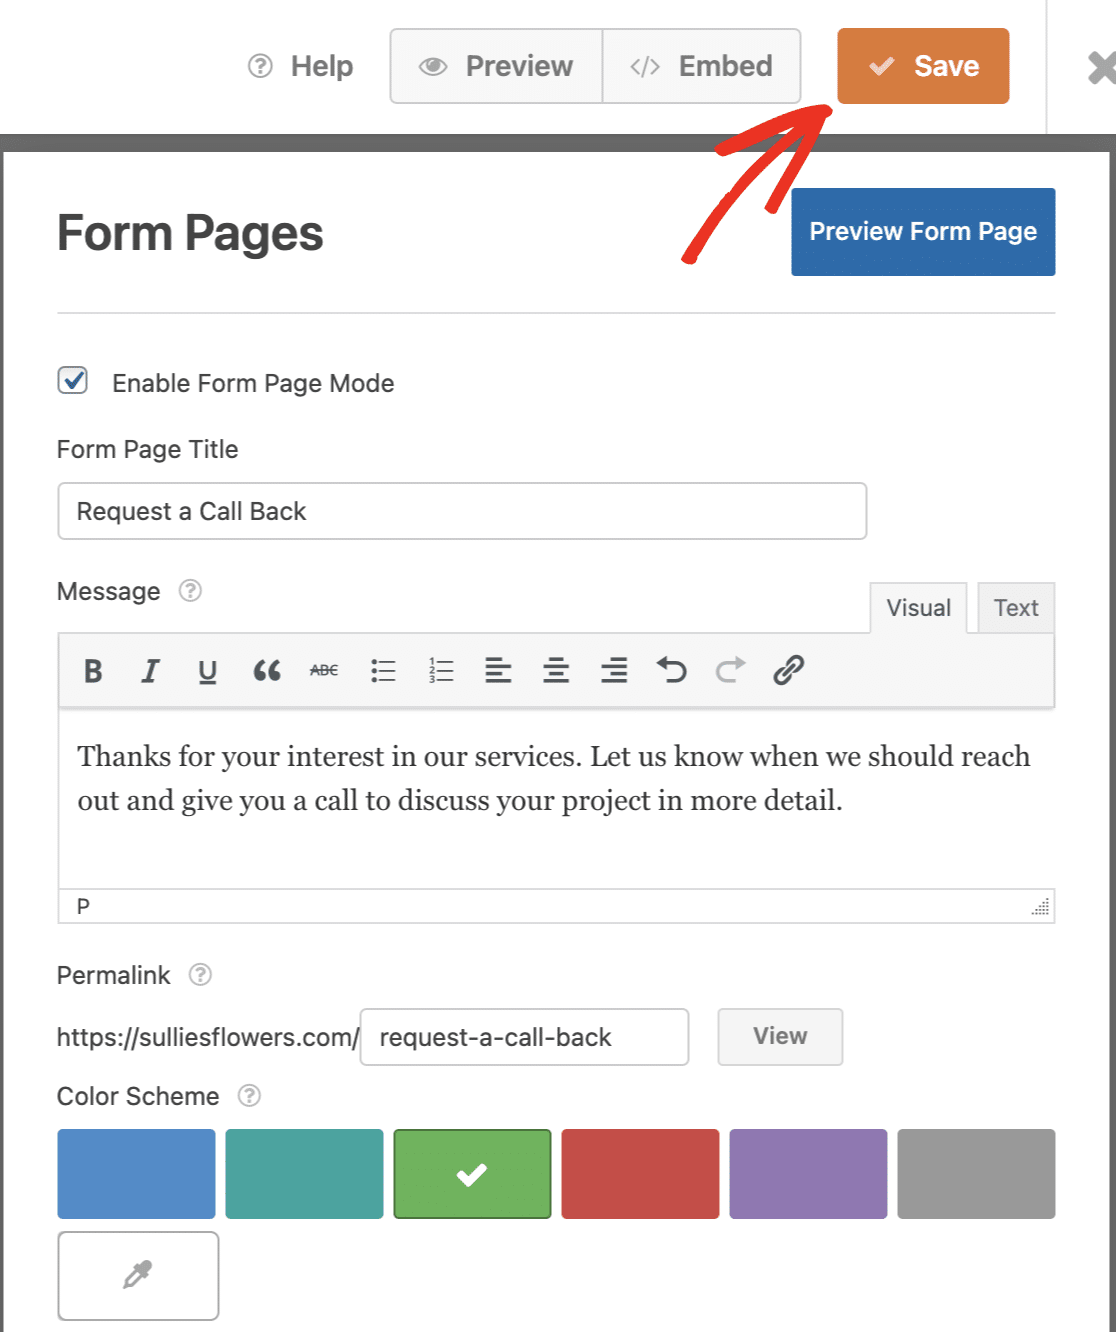 Saving Form Pages settings